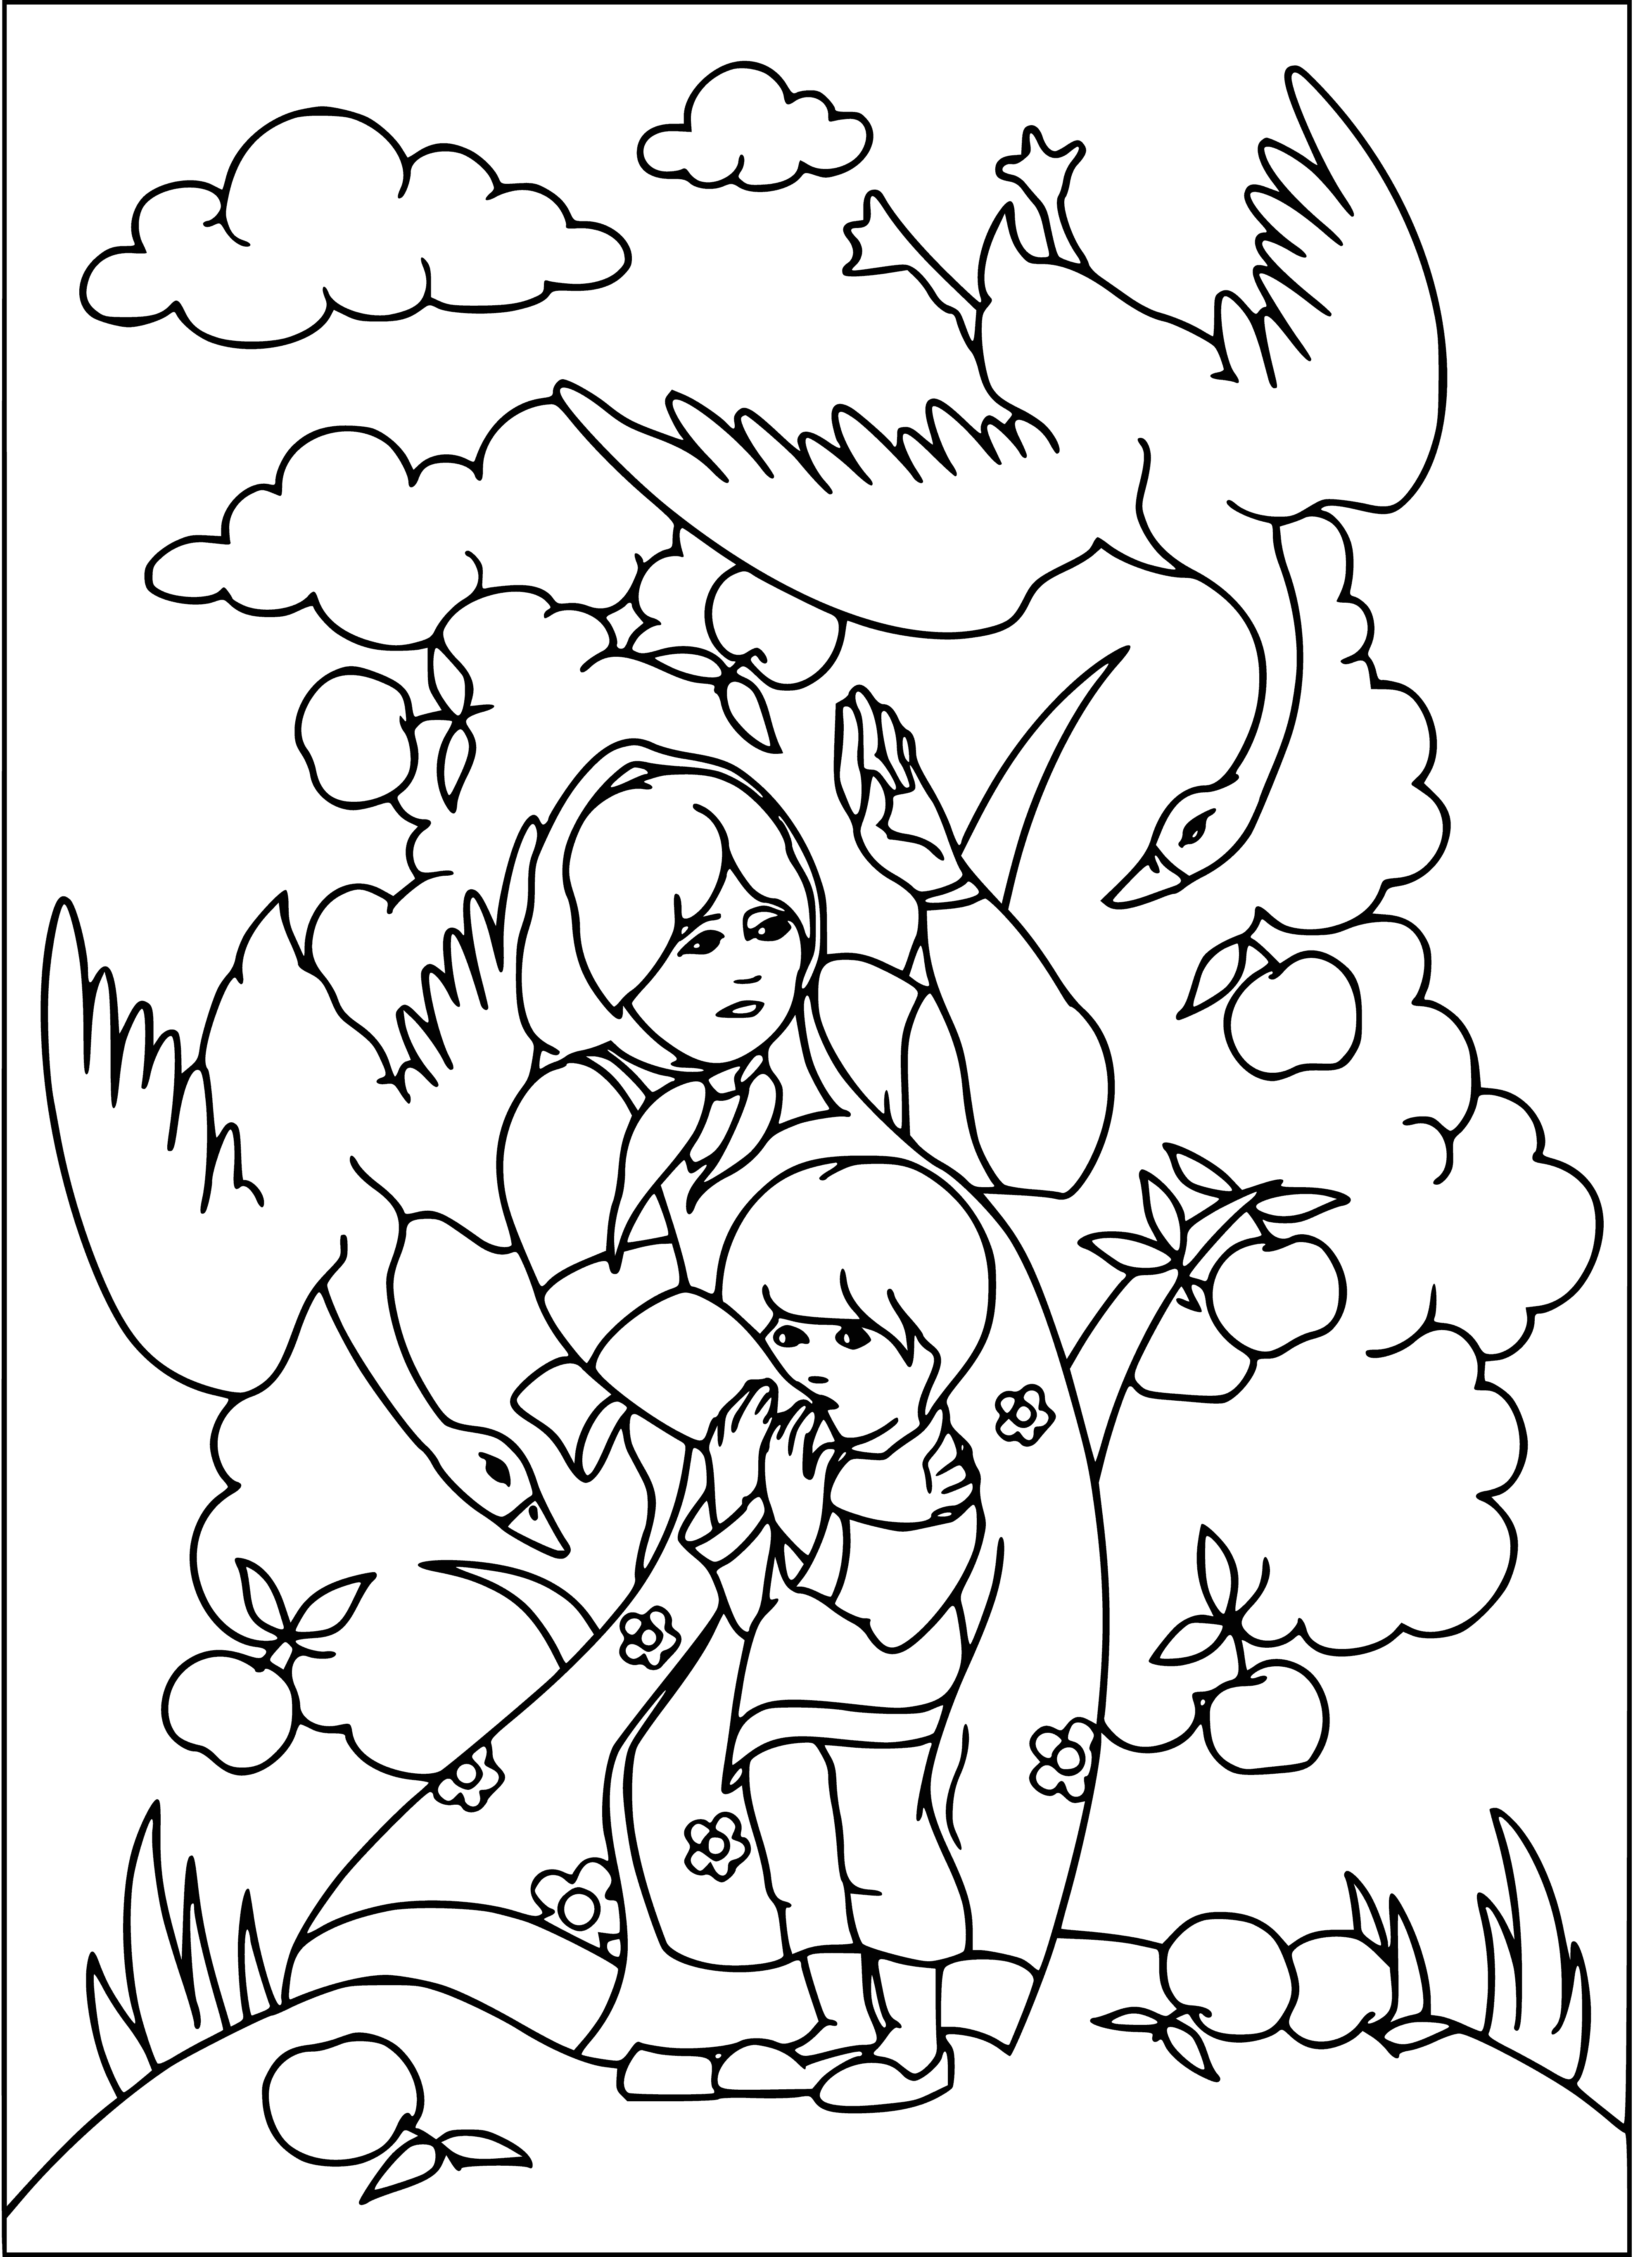 coloring page: Kids found refuge from the sun under an apple tree, playing & laughing. It gave them a place to escape the heat of the day.